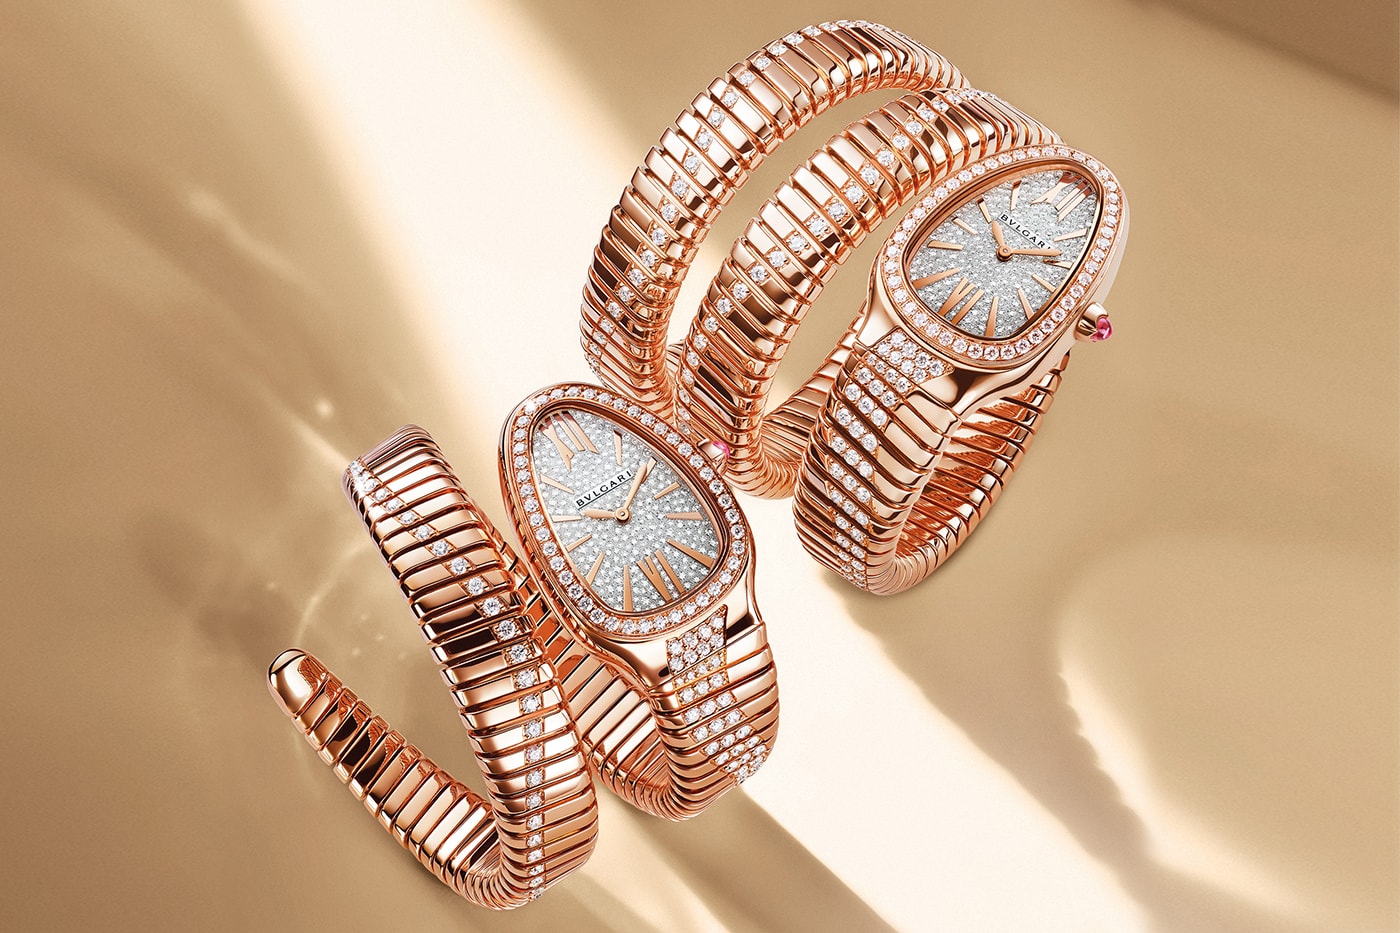 What Is The Bulgari Serpenti Collection And How Much Does It Cost?